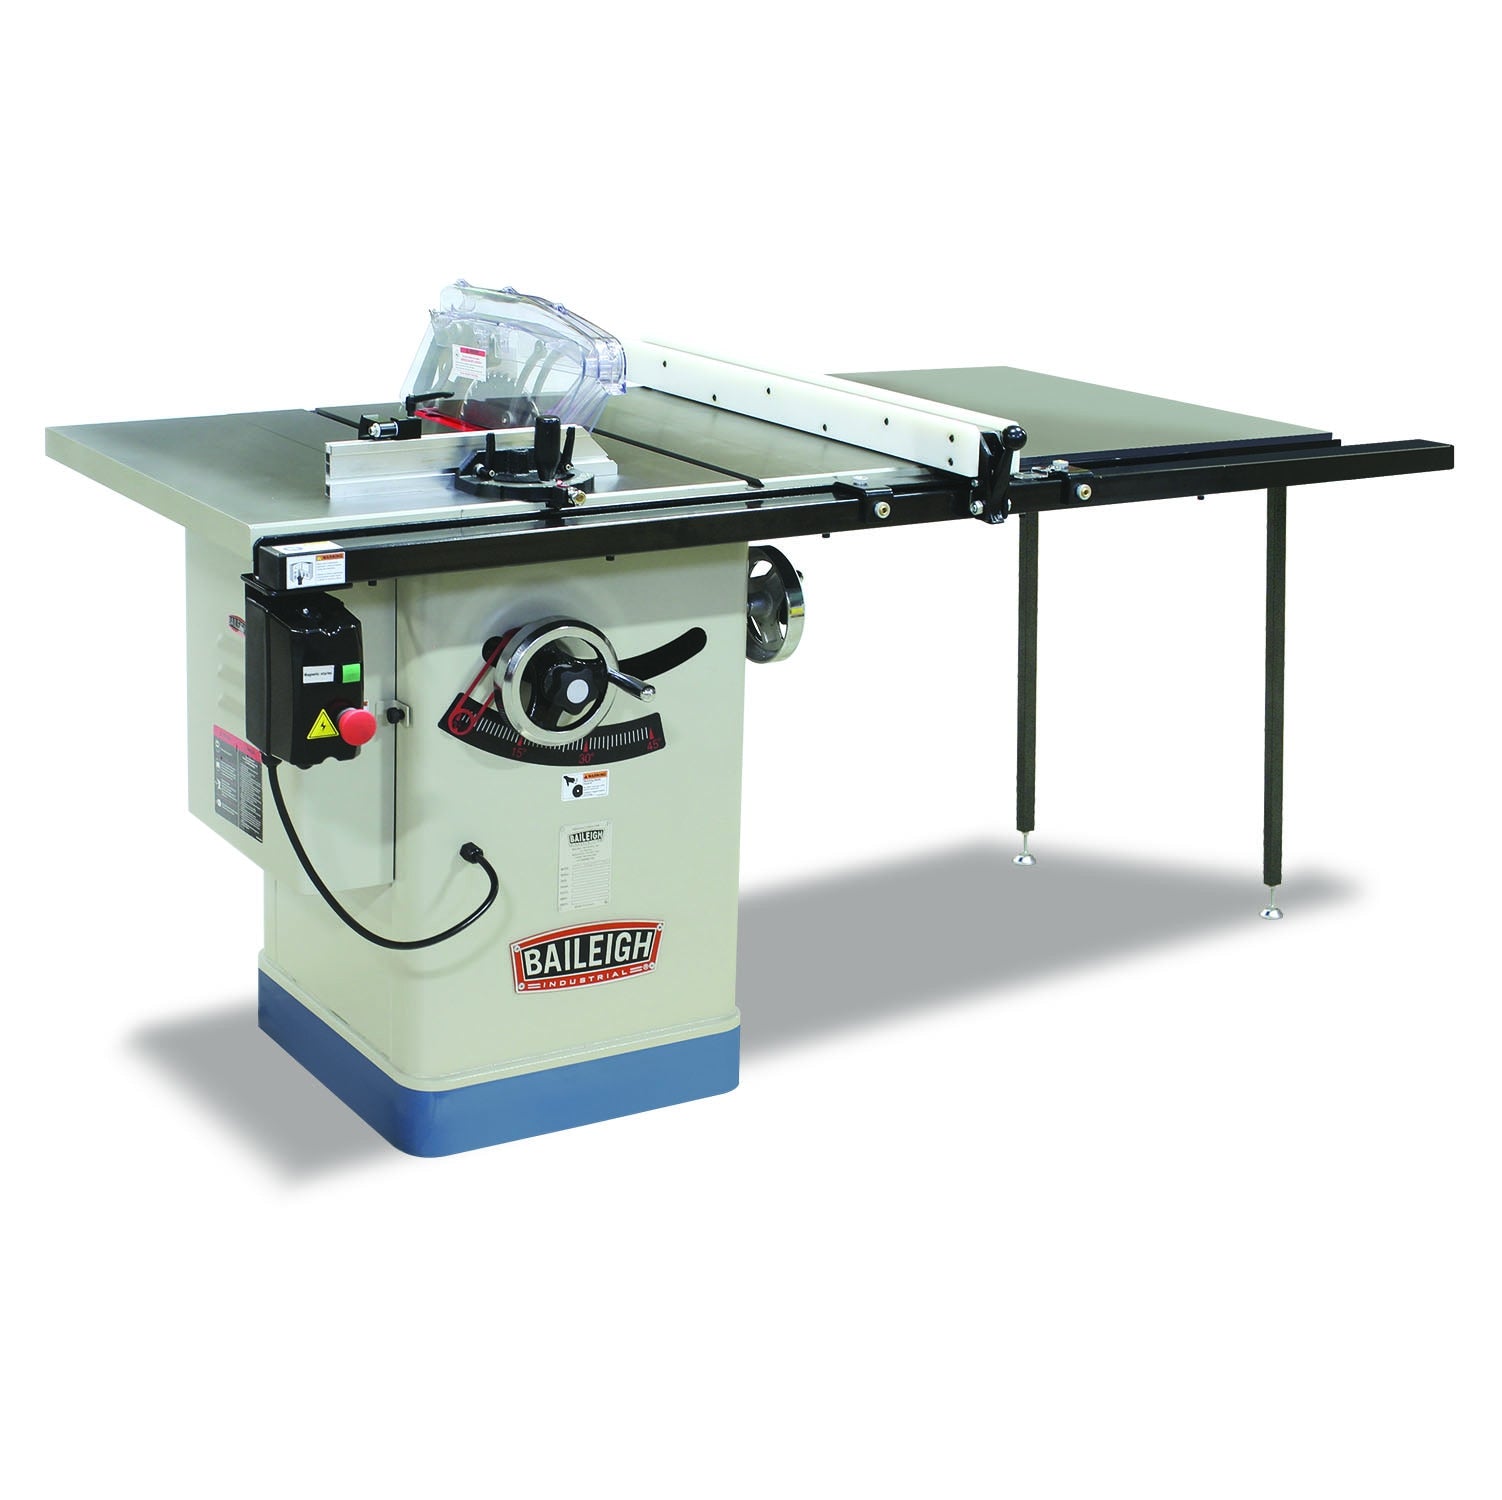 Baileigh TS-1040E-50-V3 2HP 220V 1 Phase, 10" Entry Level Cabinet Style Table Saw, 40" x 27", blade guard